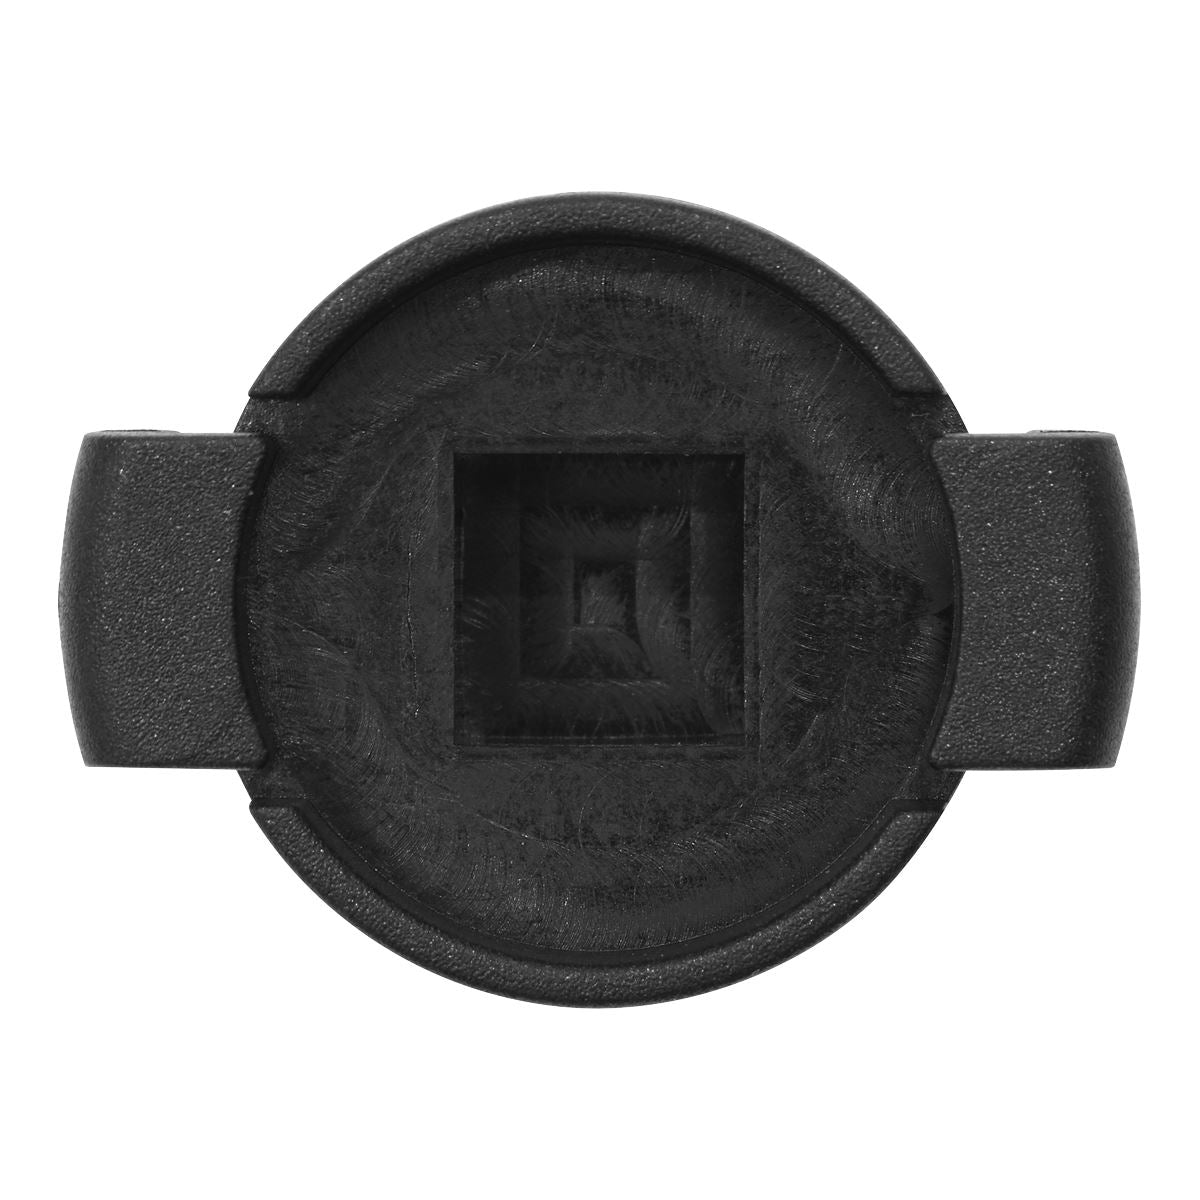 Sealey Plastic Sump Plug For Ford EcoBoost (Ford Part Number 1830727)